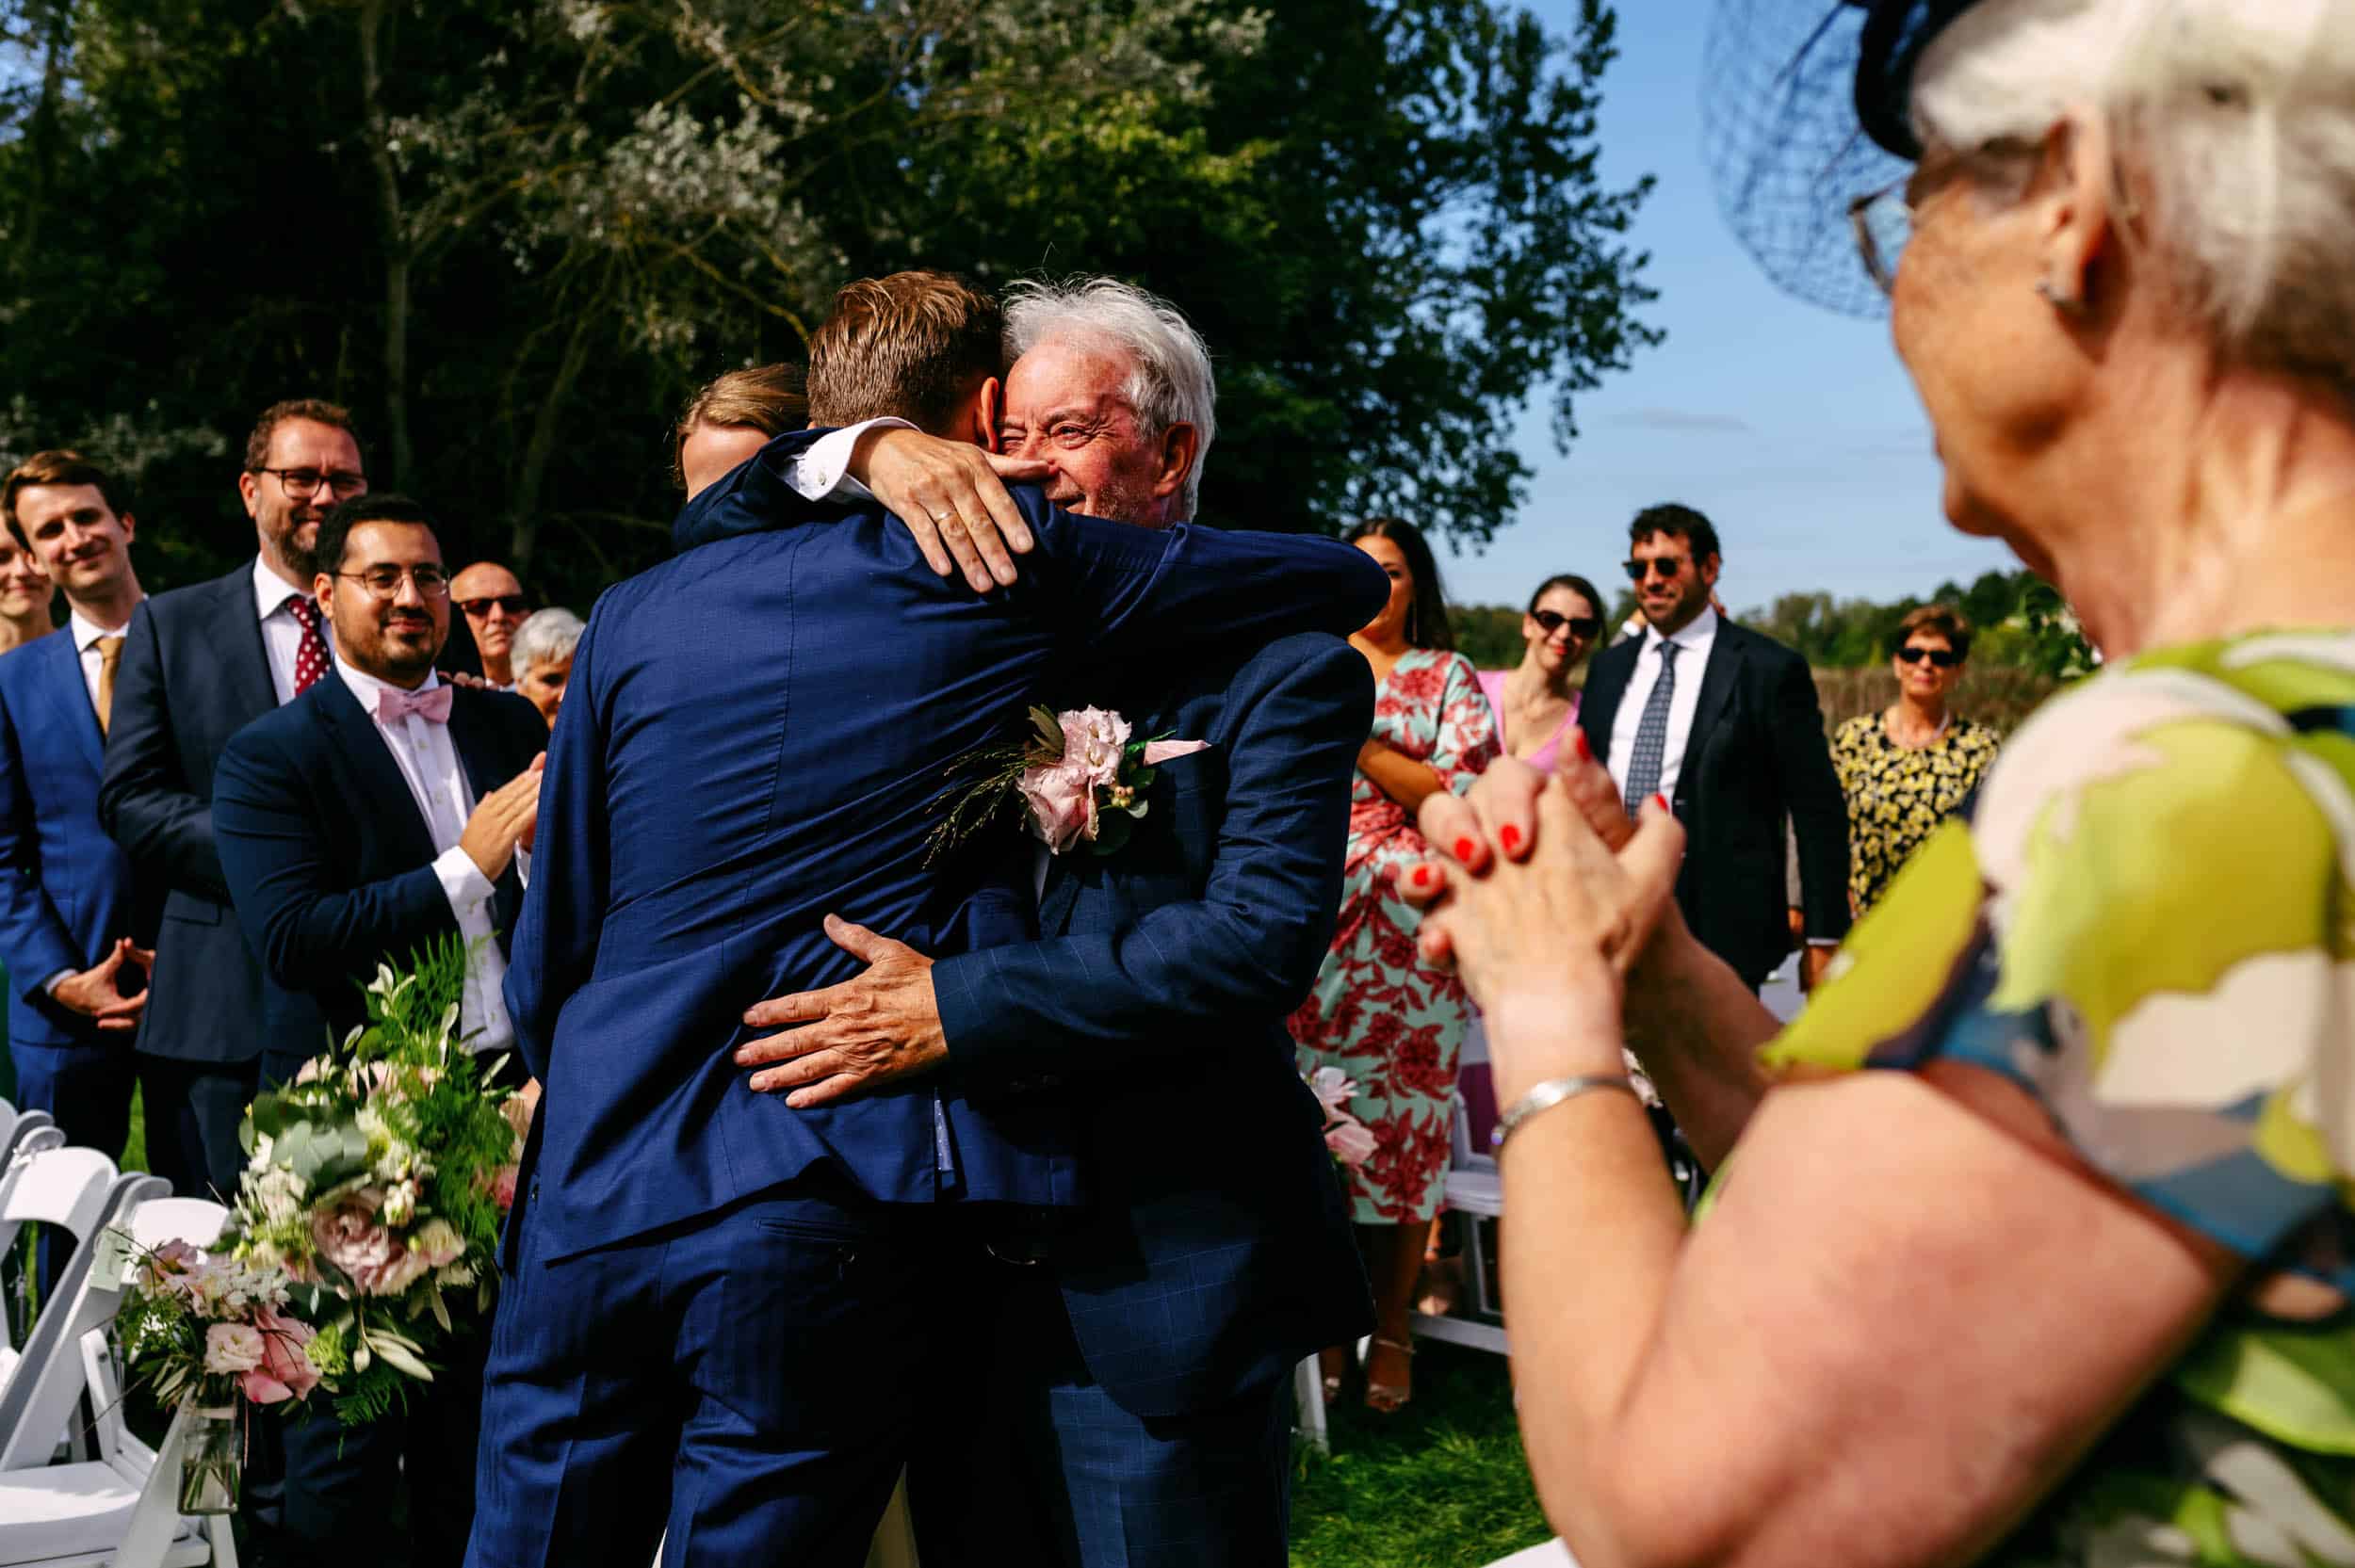 A man hugs father during a Wedding Photo at the perfect wedding ceremony.